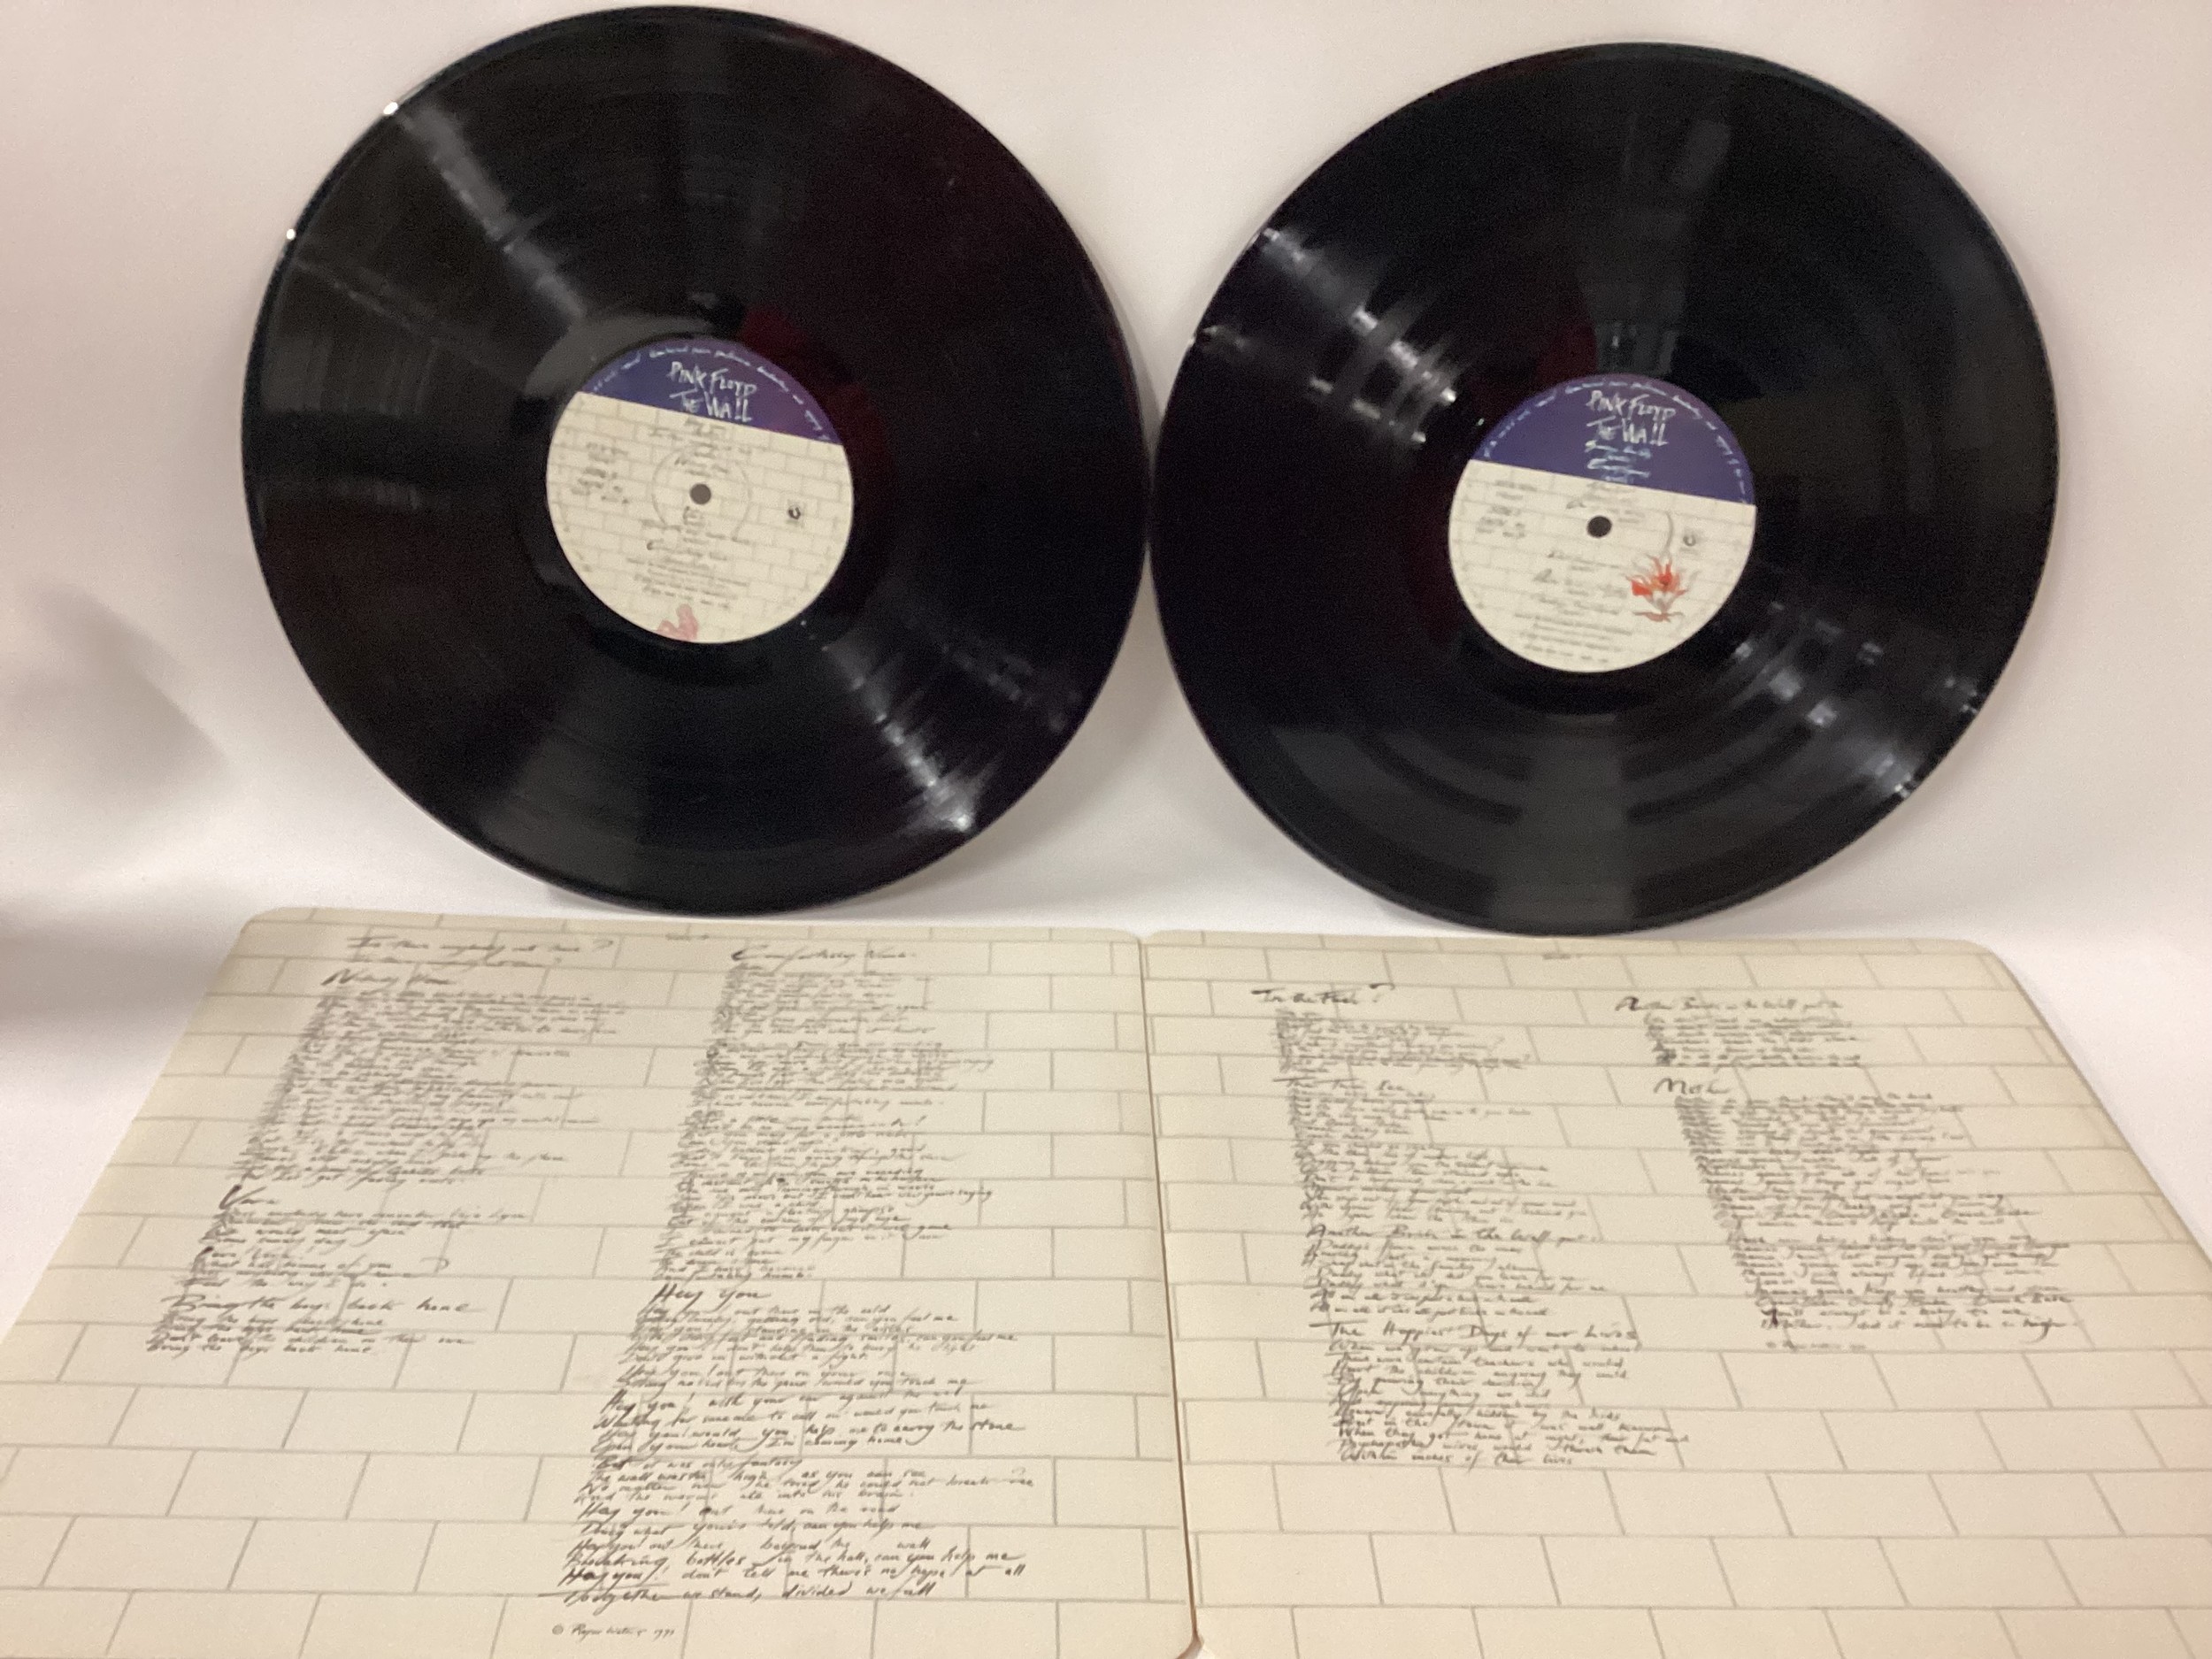 PINK FLOYD VINYL LP RECORDS X 2. Copies here include ‘The Wall’ double album on Harvest SHDW 411 - Image 4 of 9